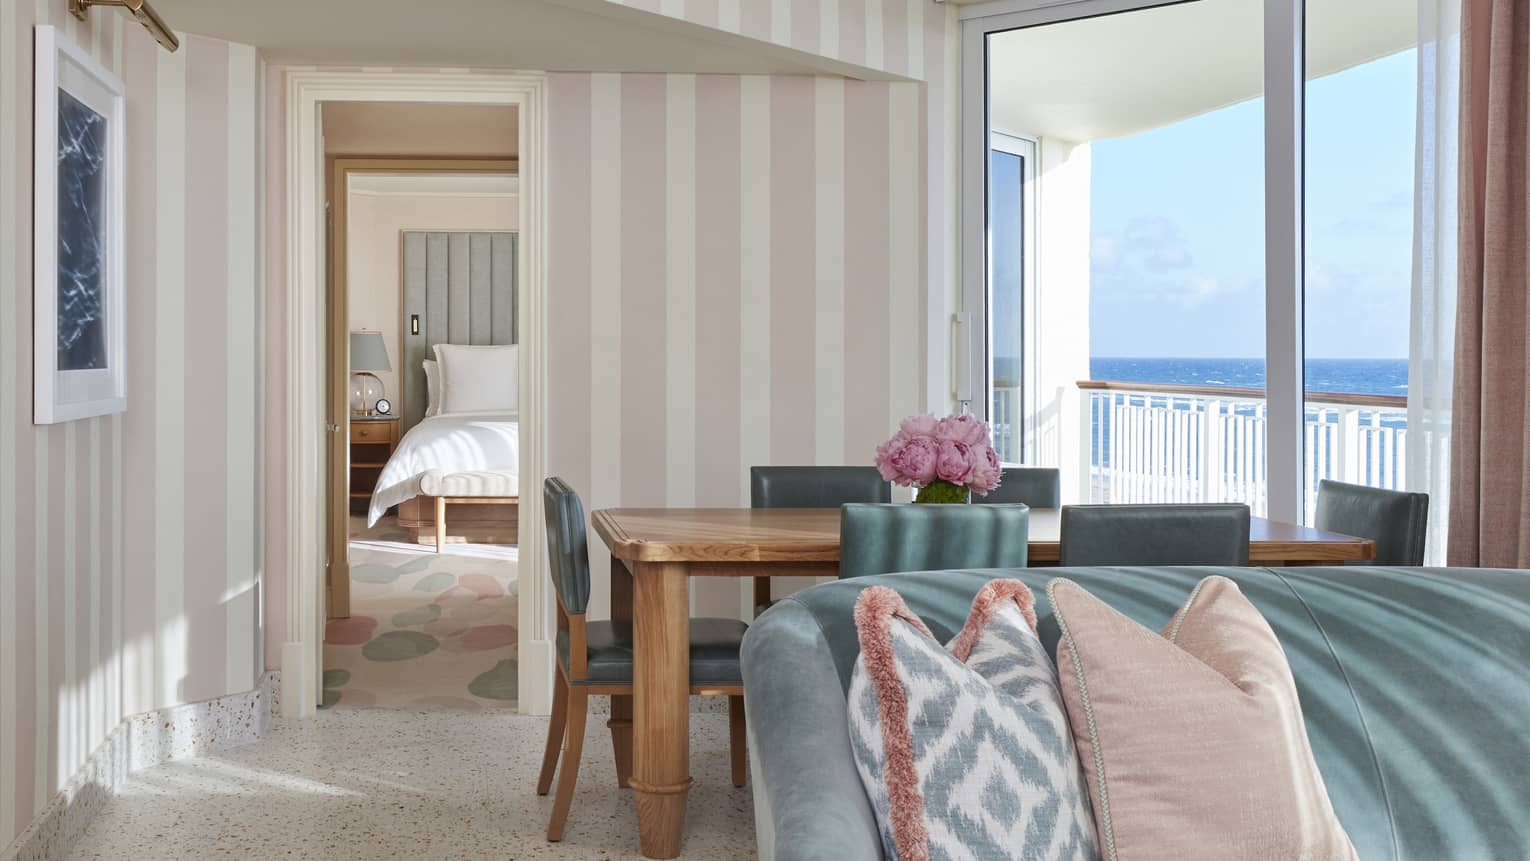 Ocean Grand Suite's living area, featuring a sofa, dining table and light pink- and white-striped walls